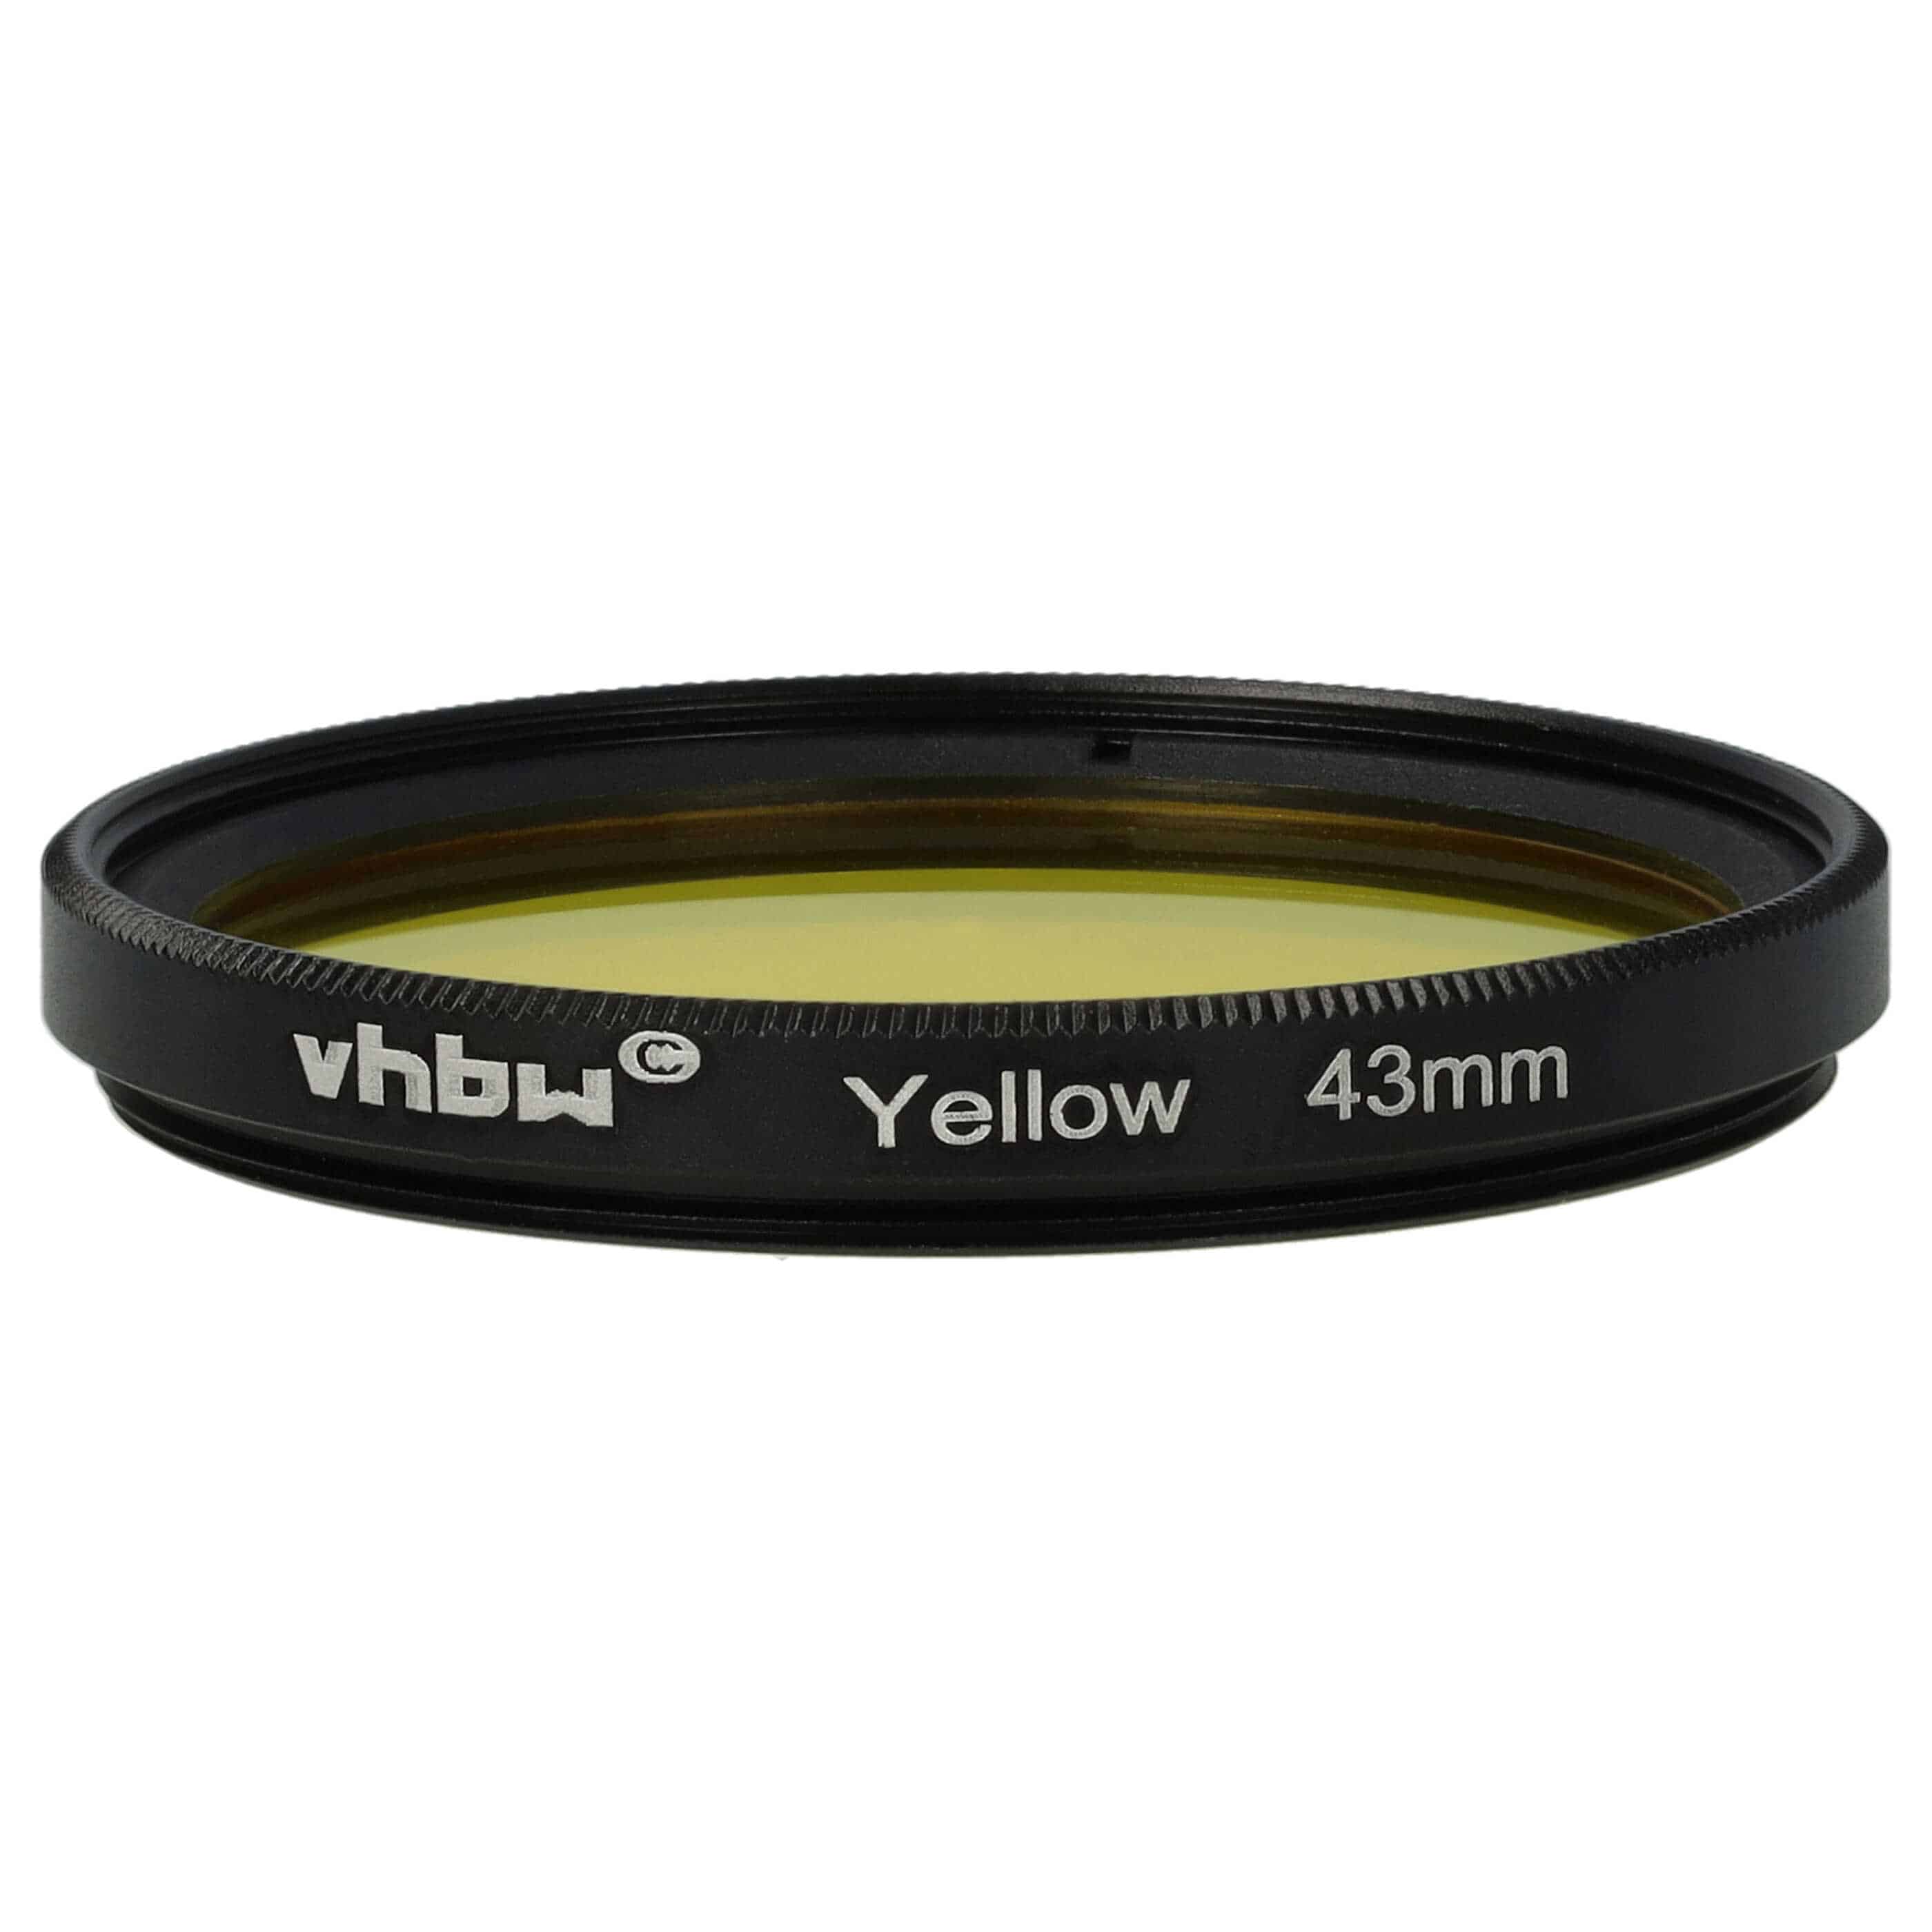 Coloured Filter, Yellow suitable for Camera Lenses with 43 mm Filter Thread - Yellow Filter